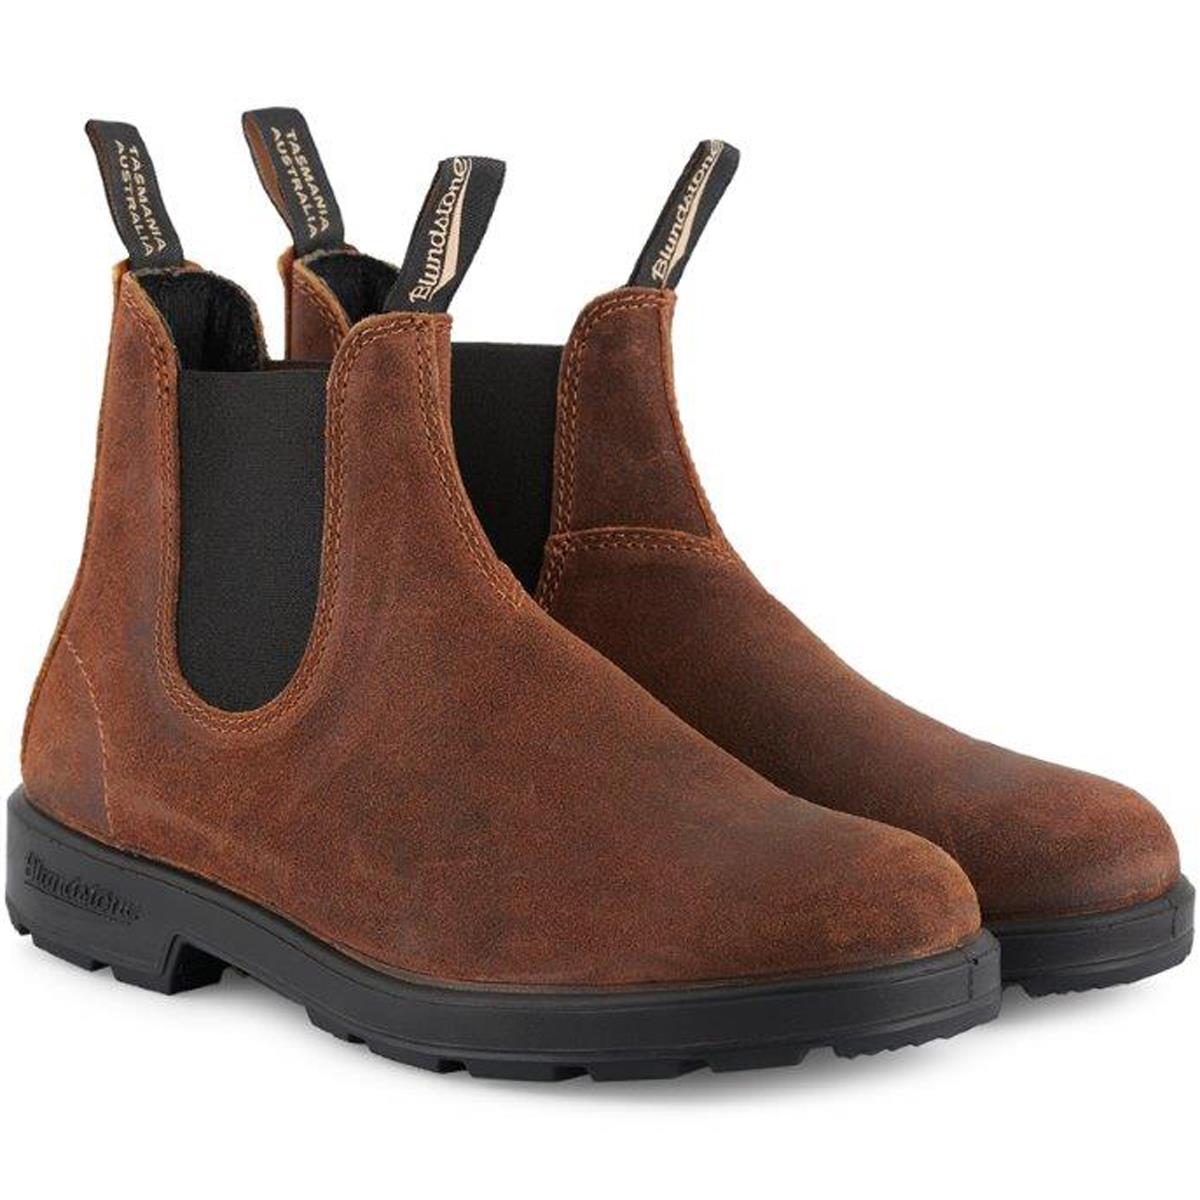 Blundstone Unisex Originals 1911 Chelsea Boot Questions & Answers